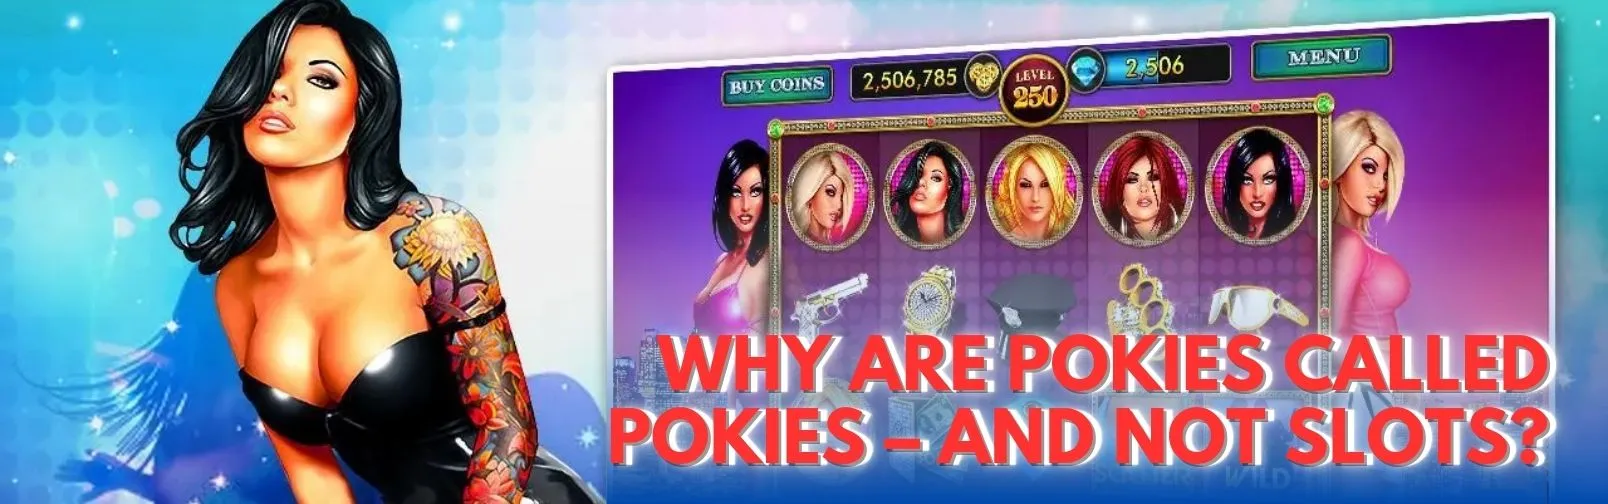 Why Are Pokies Called Pokies and Not Slots